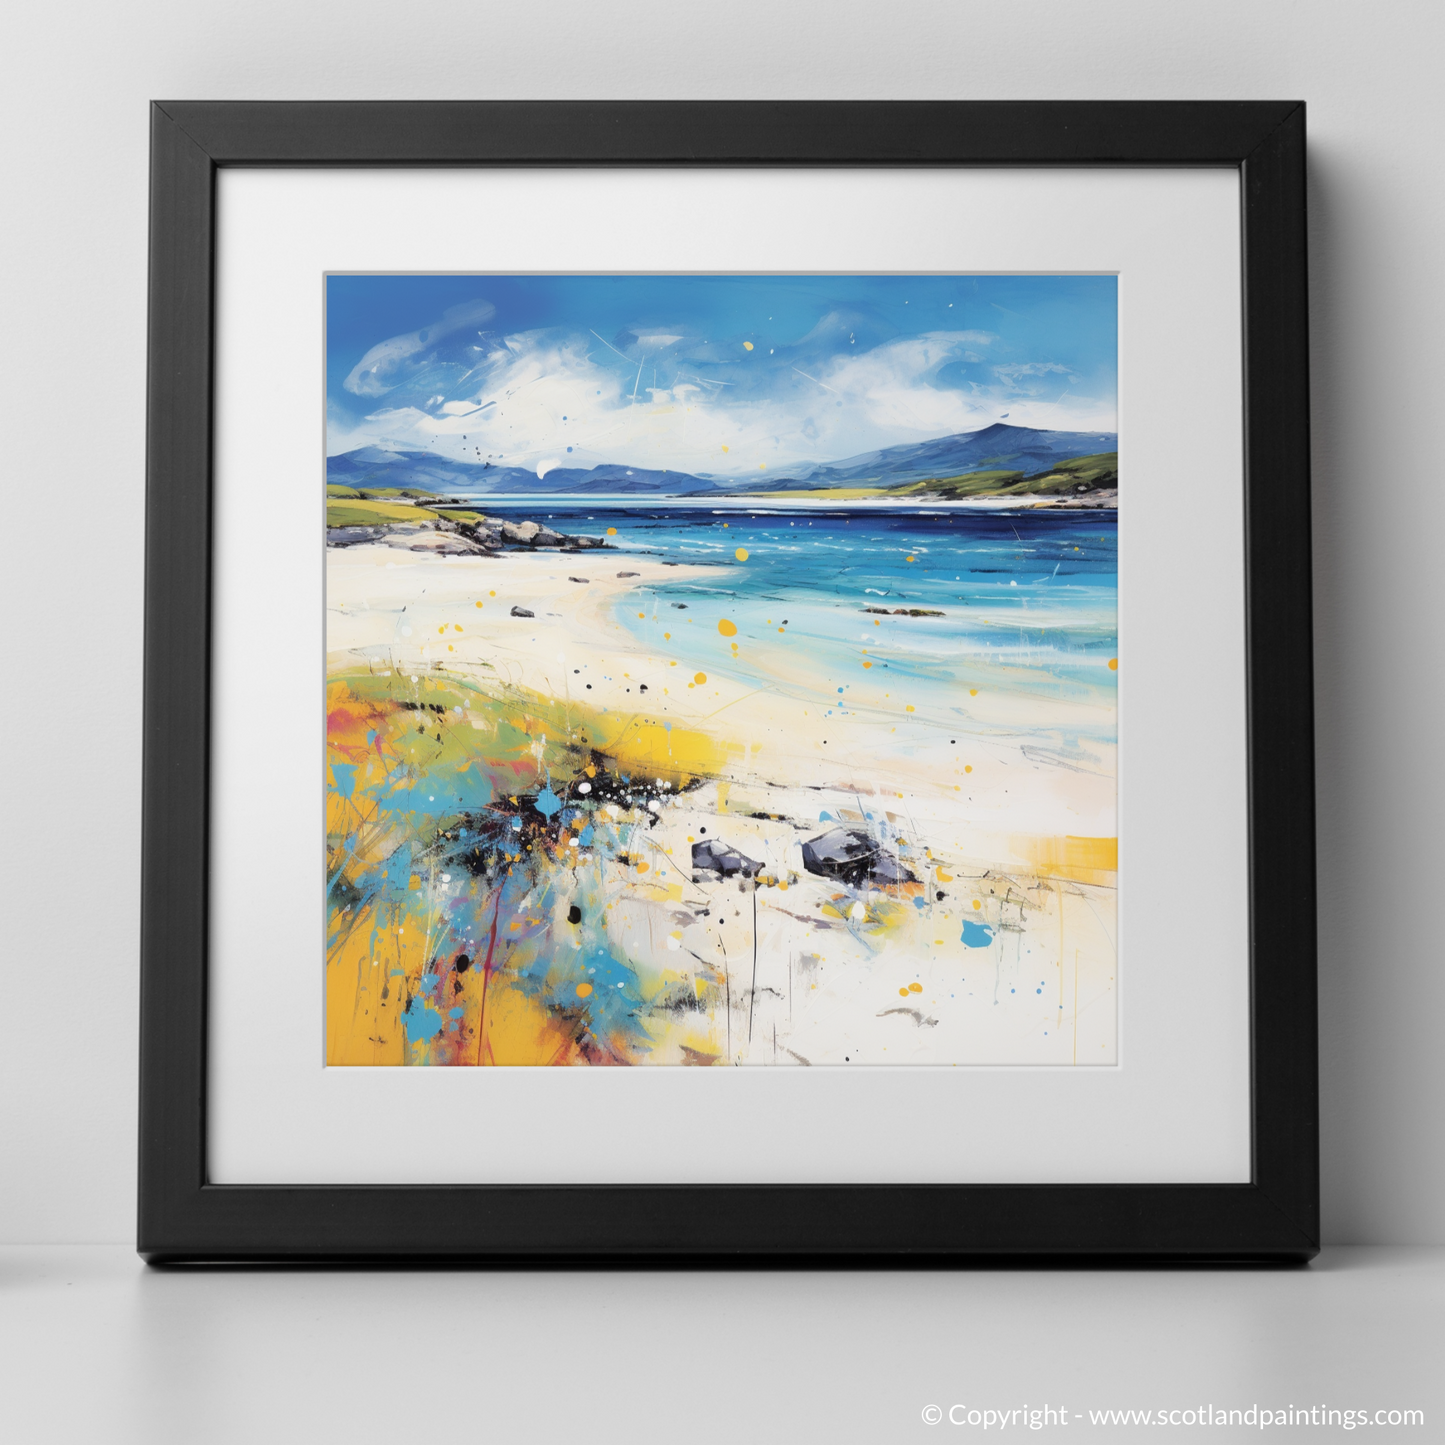 Art Print of Scarista Beach, Isle of Harris in summer with a black frame